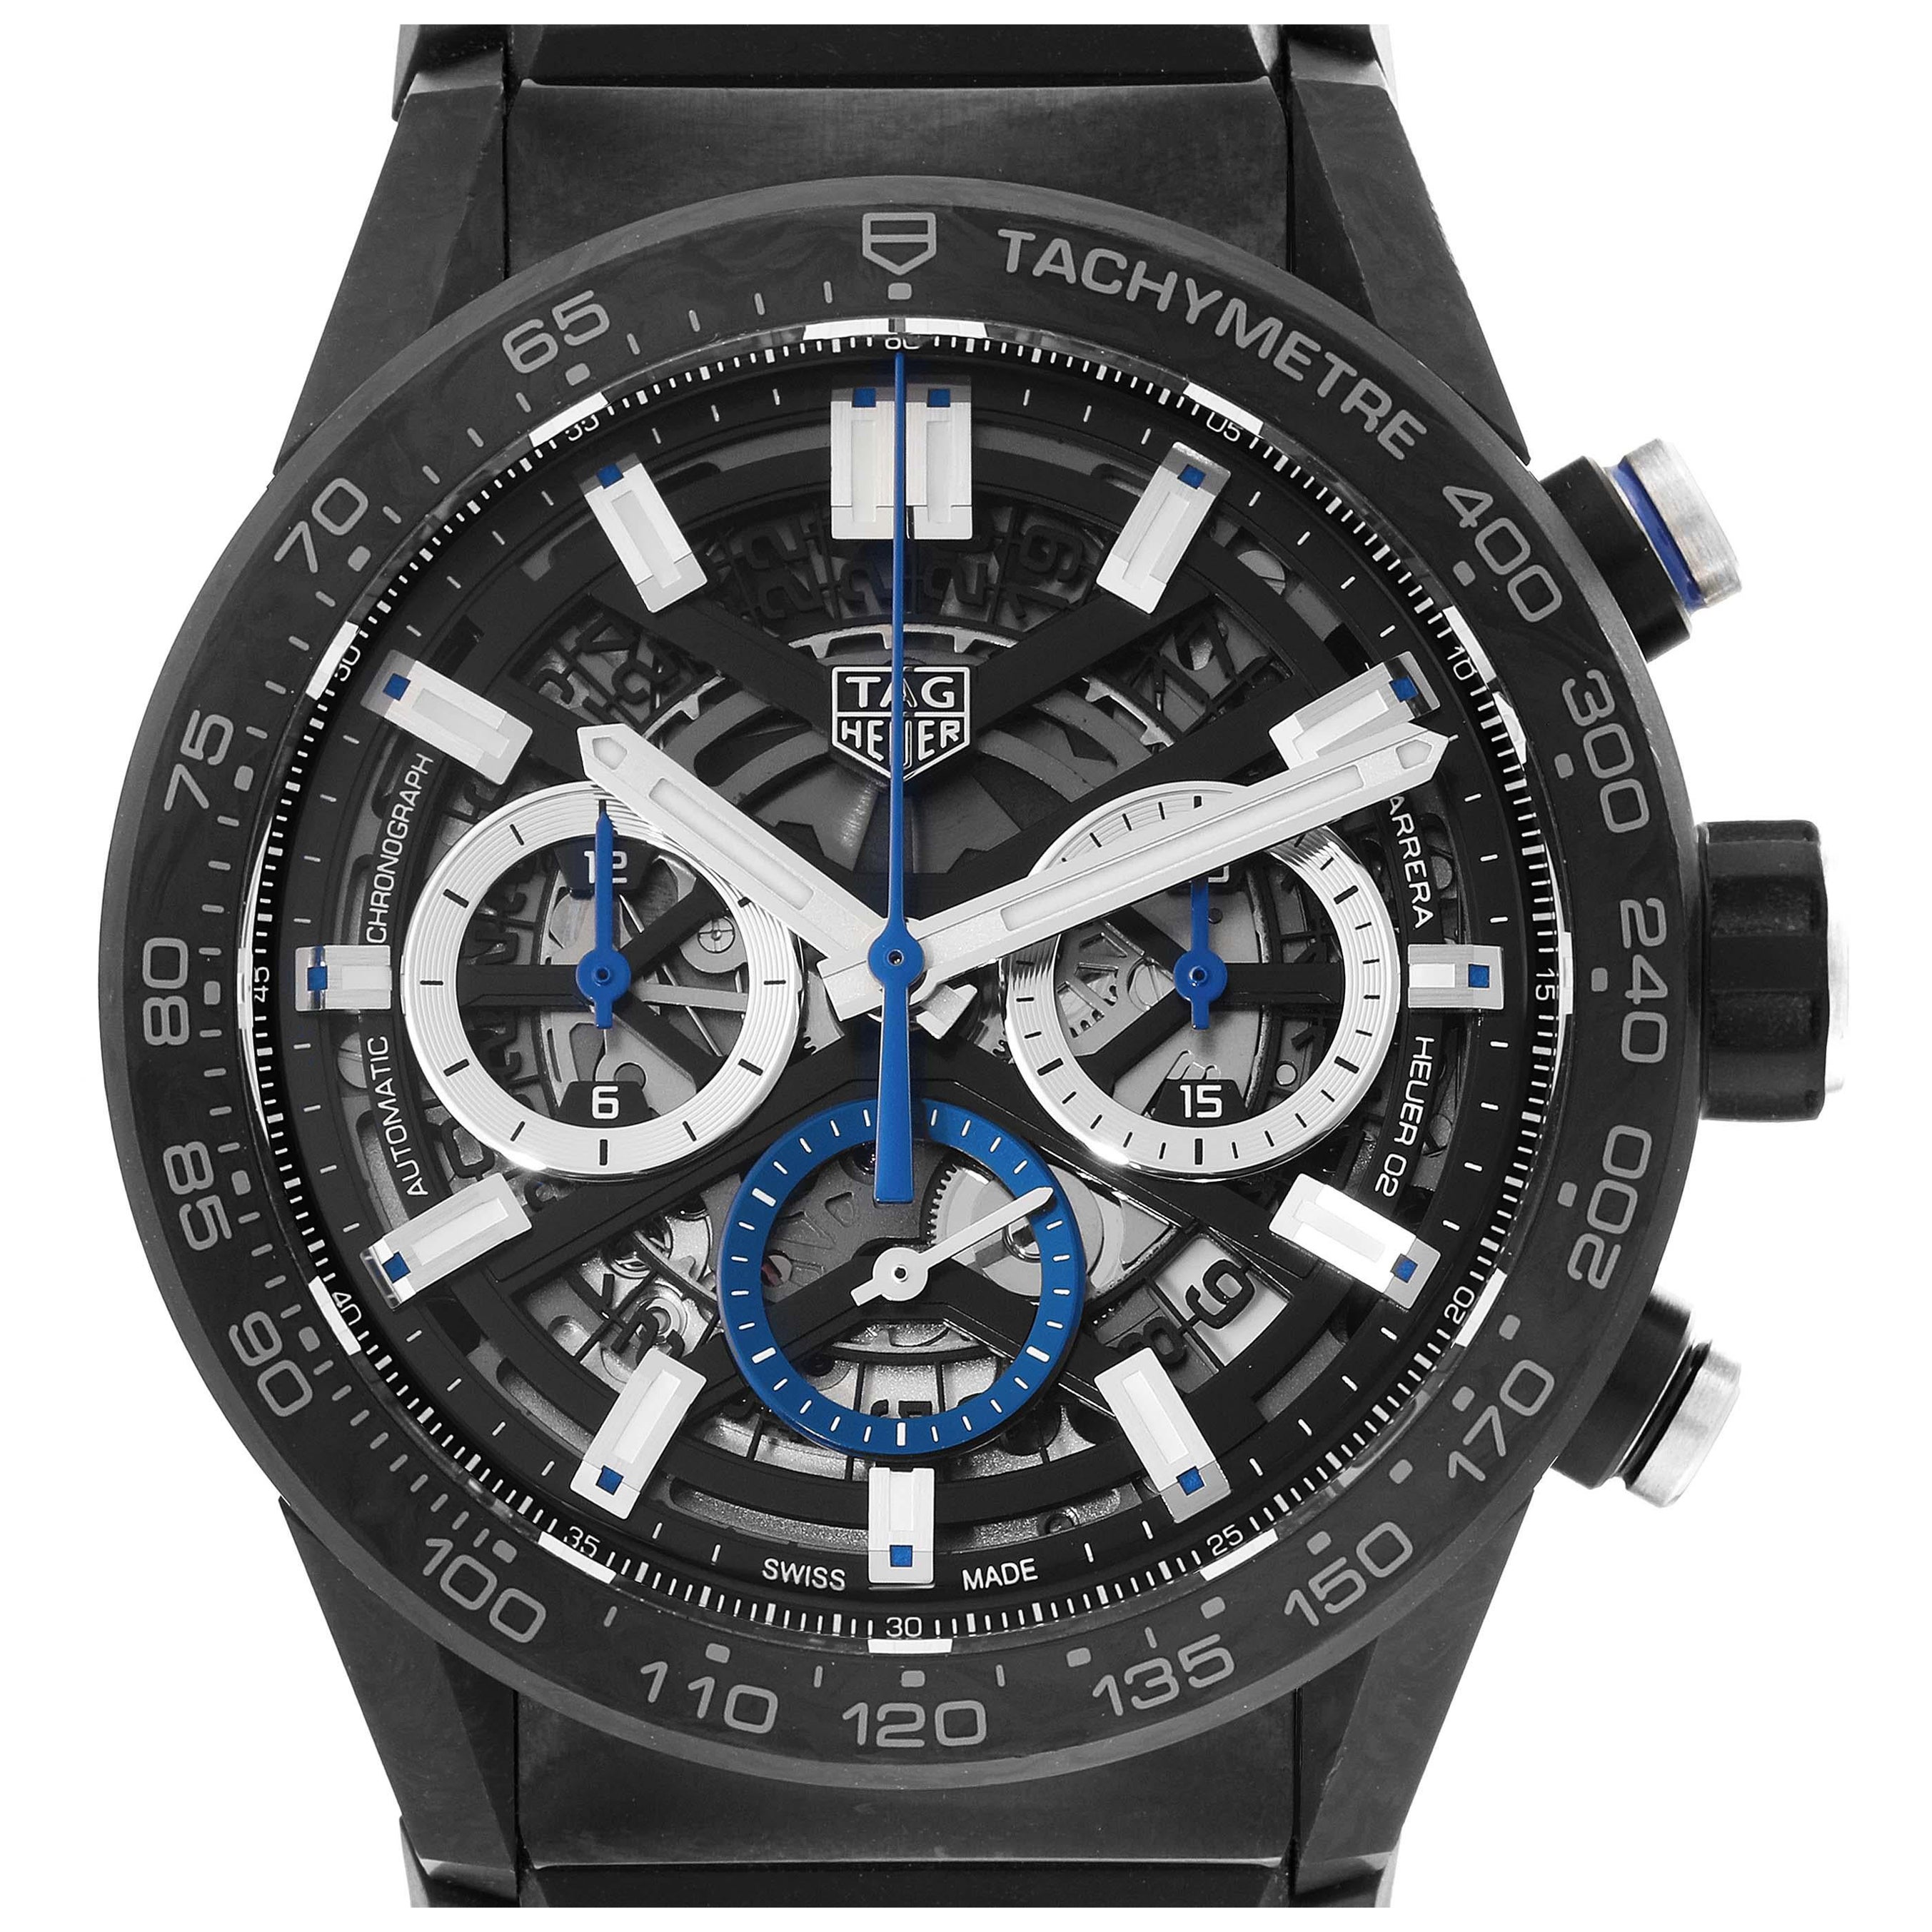 Tag Heuer Carrera Chronograph Limited Edition Steel Carbon Mens Watch CBG2017 For Sale